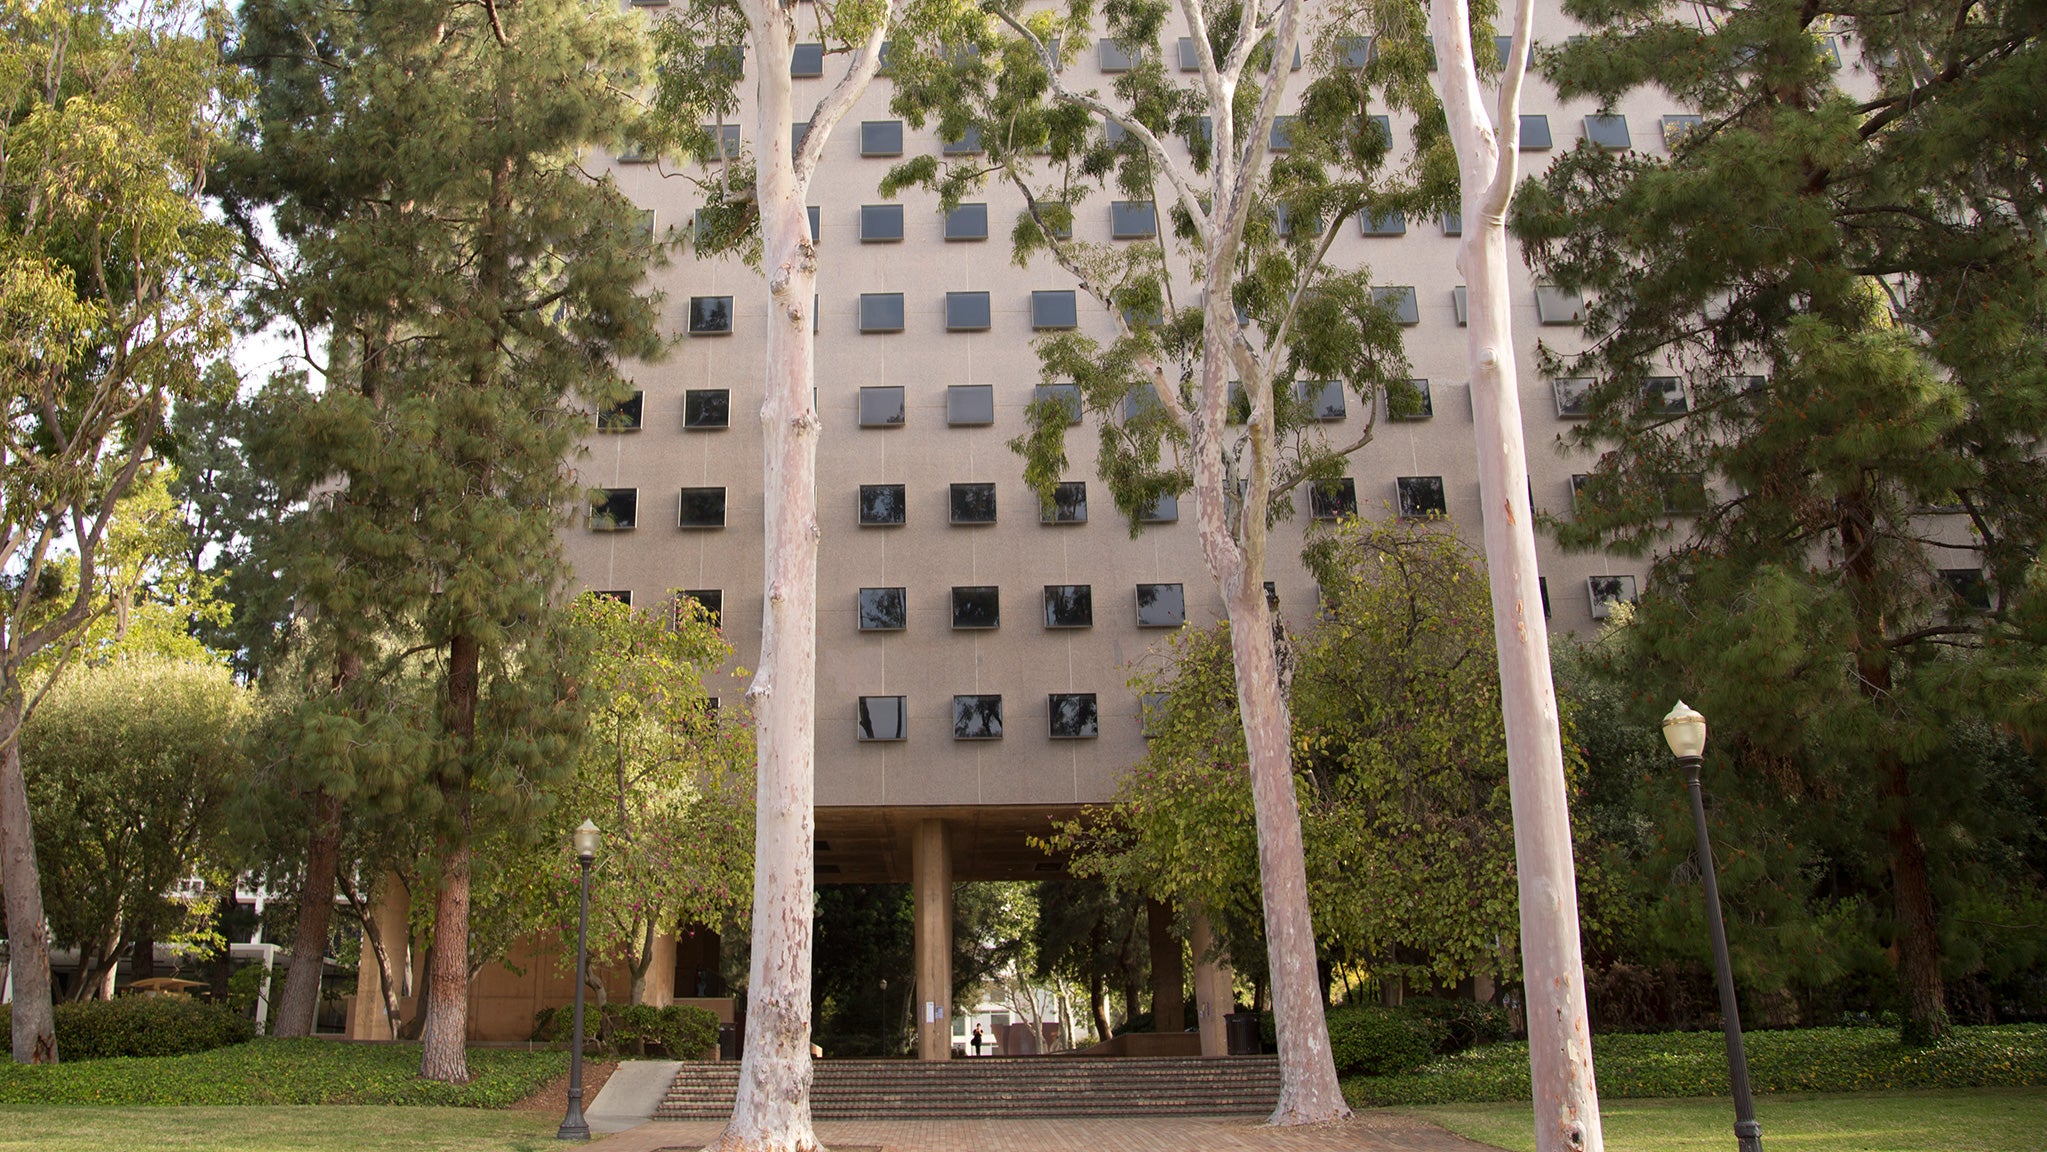 Bunche Hall is shaded by pretty trees.